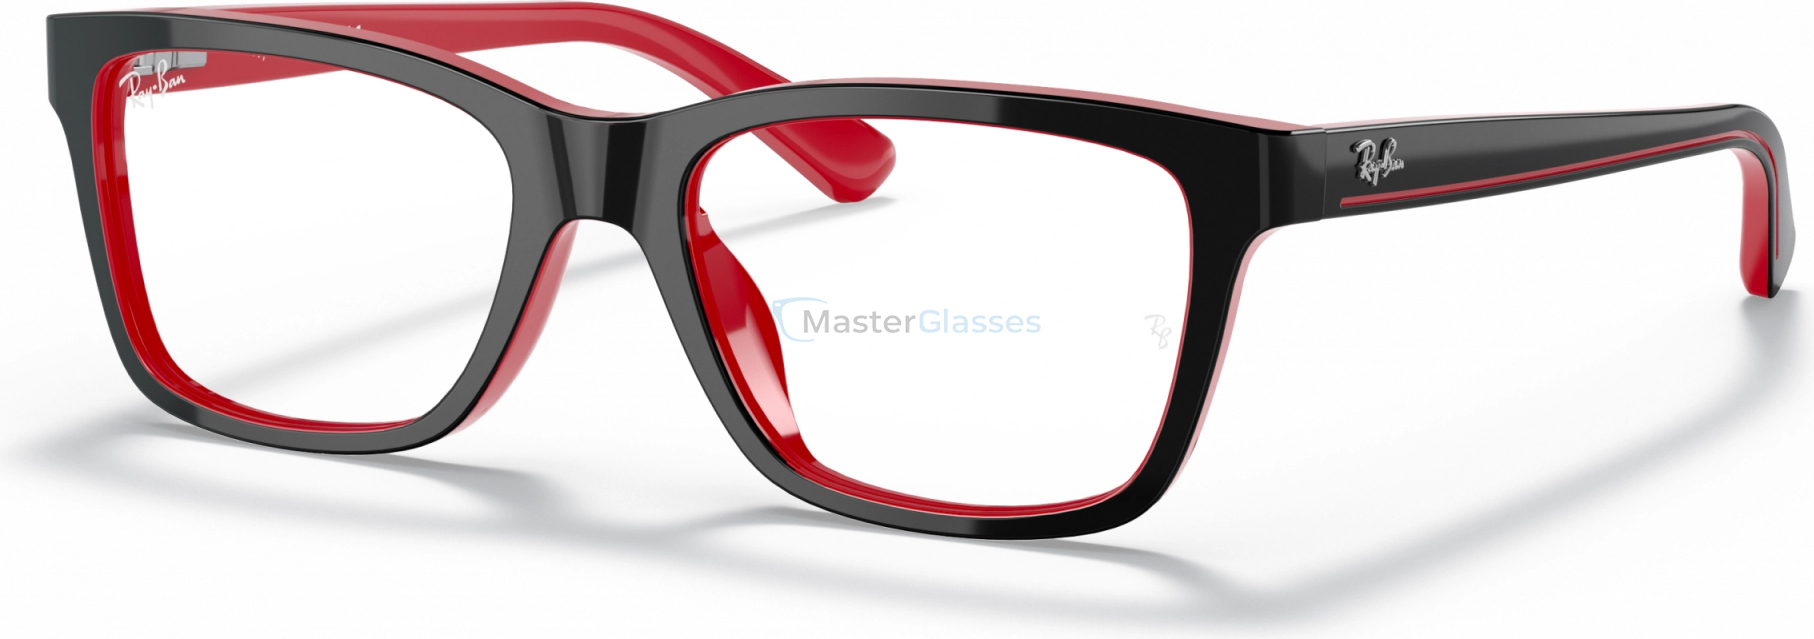  Ray-Ban RY1536 3573 Top Black On Red